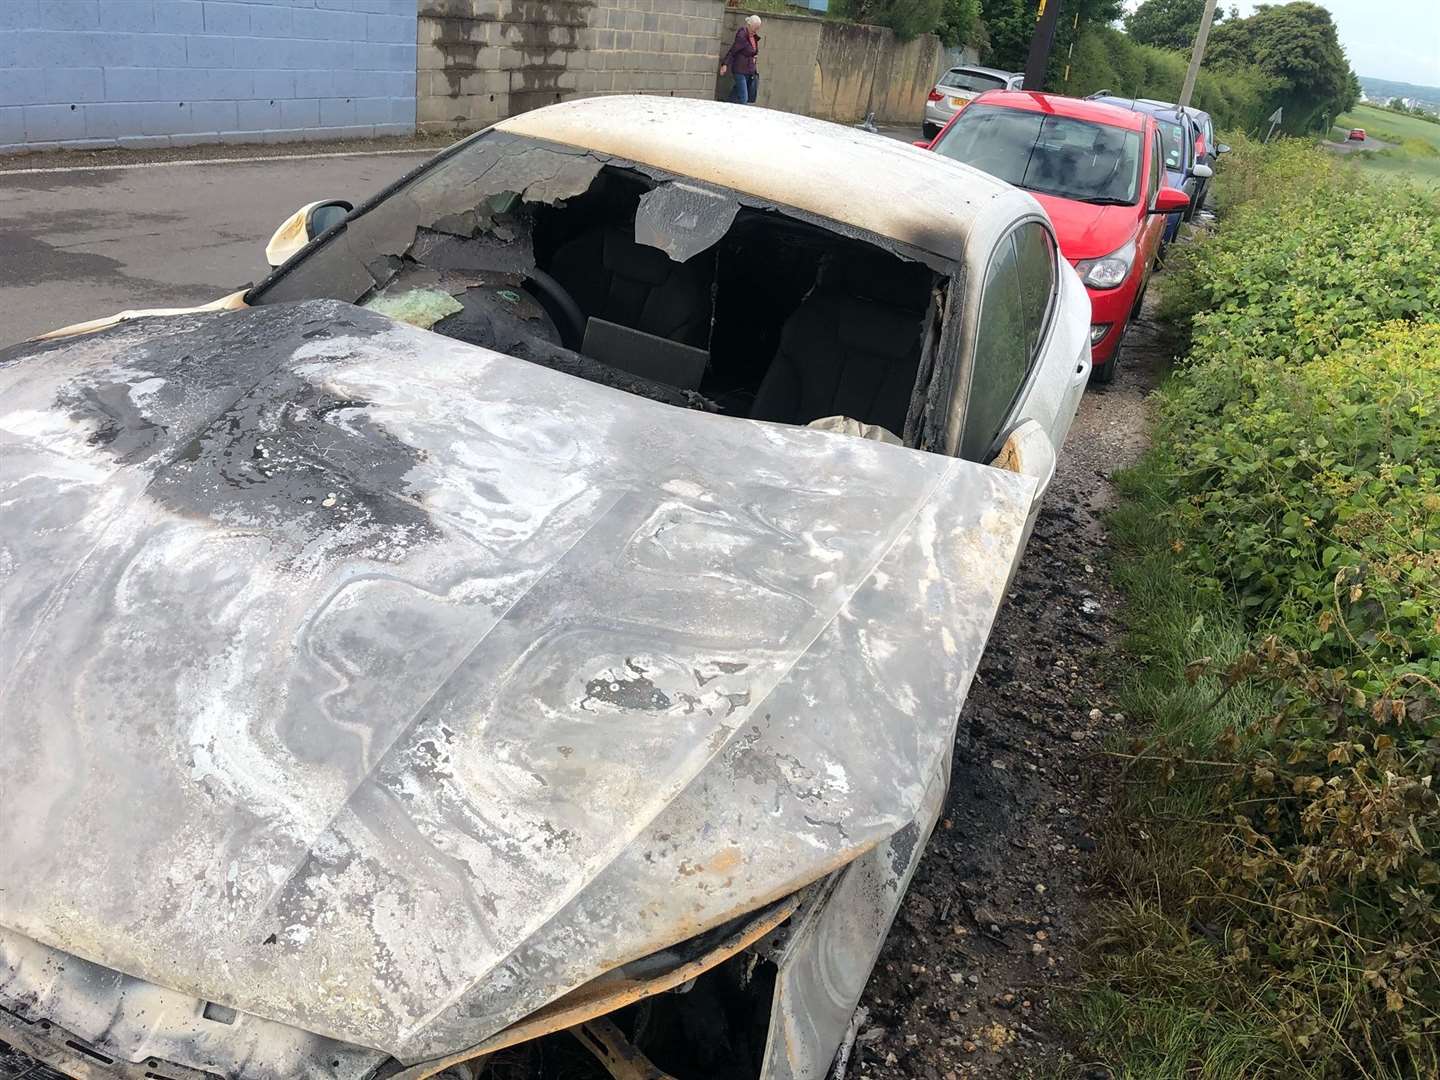 Leon King is calling for answers after his Audi A5 inexplicably caught fire